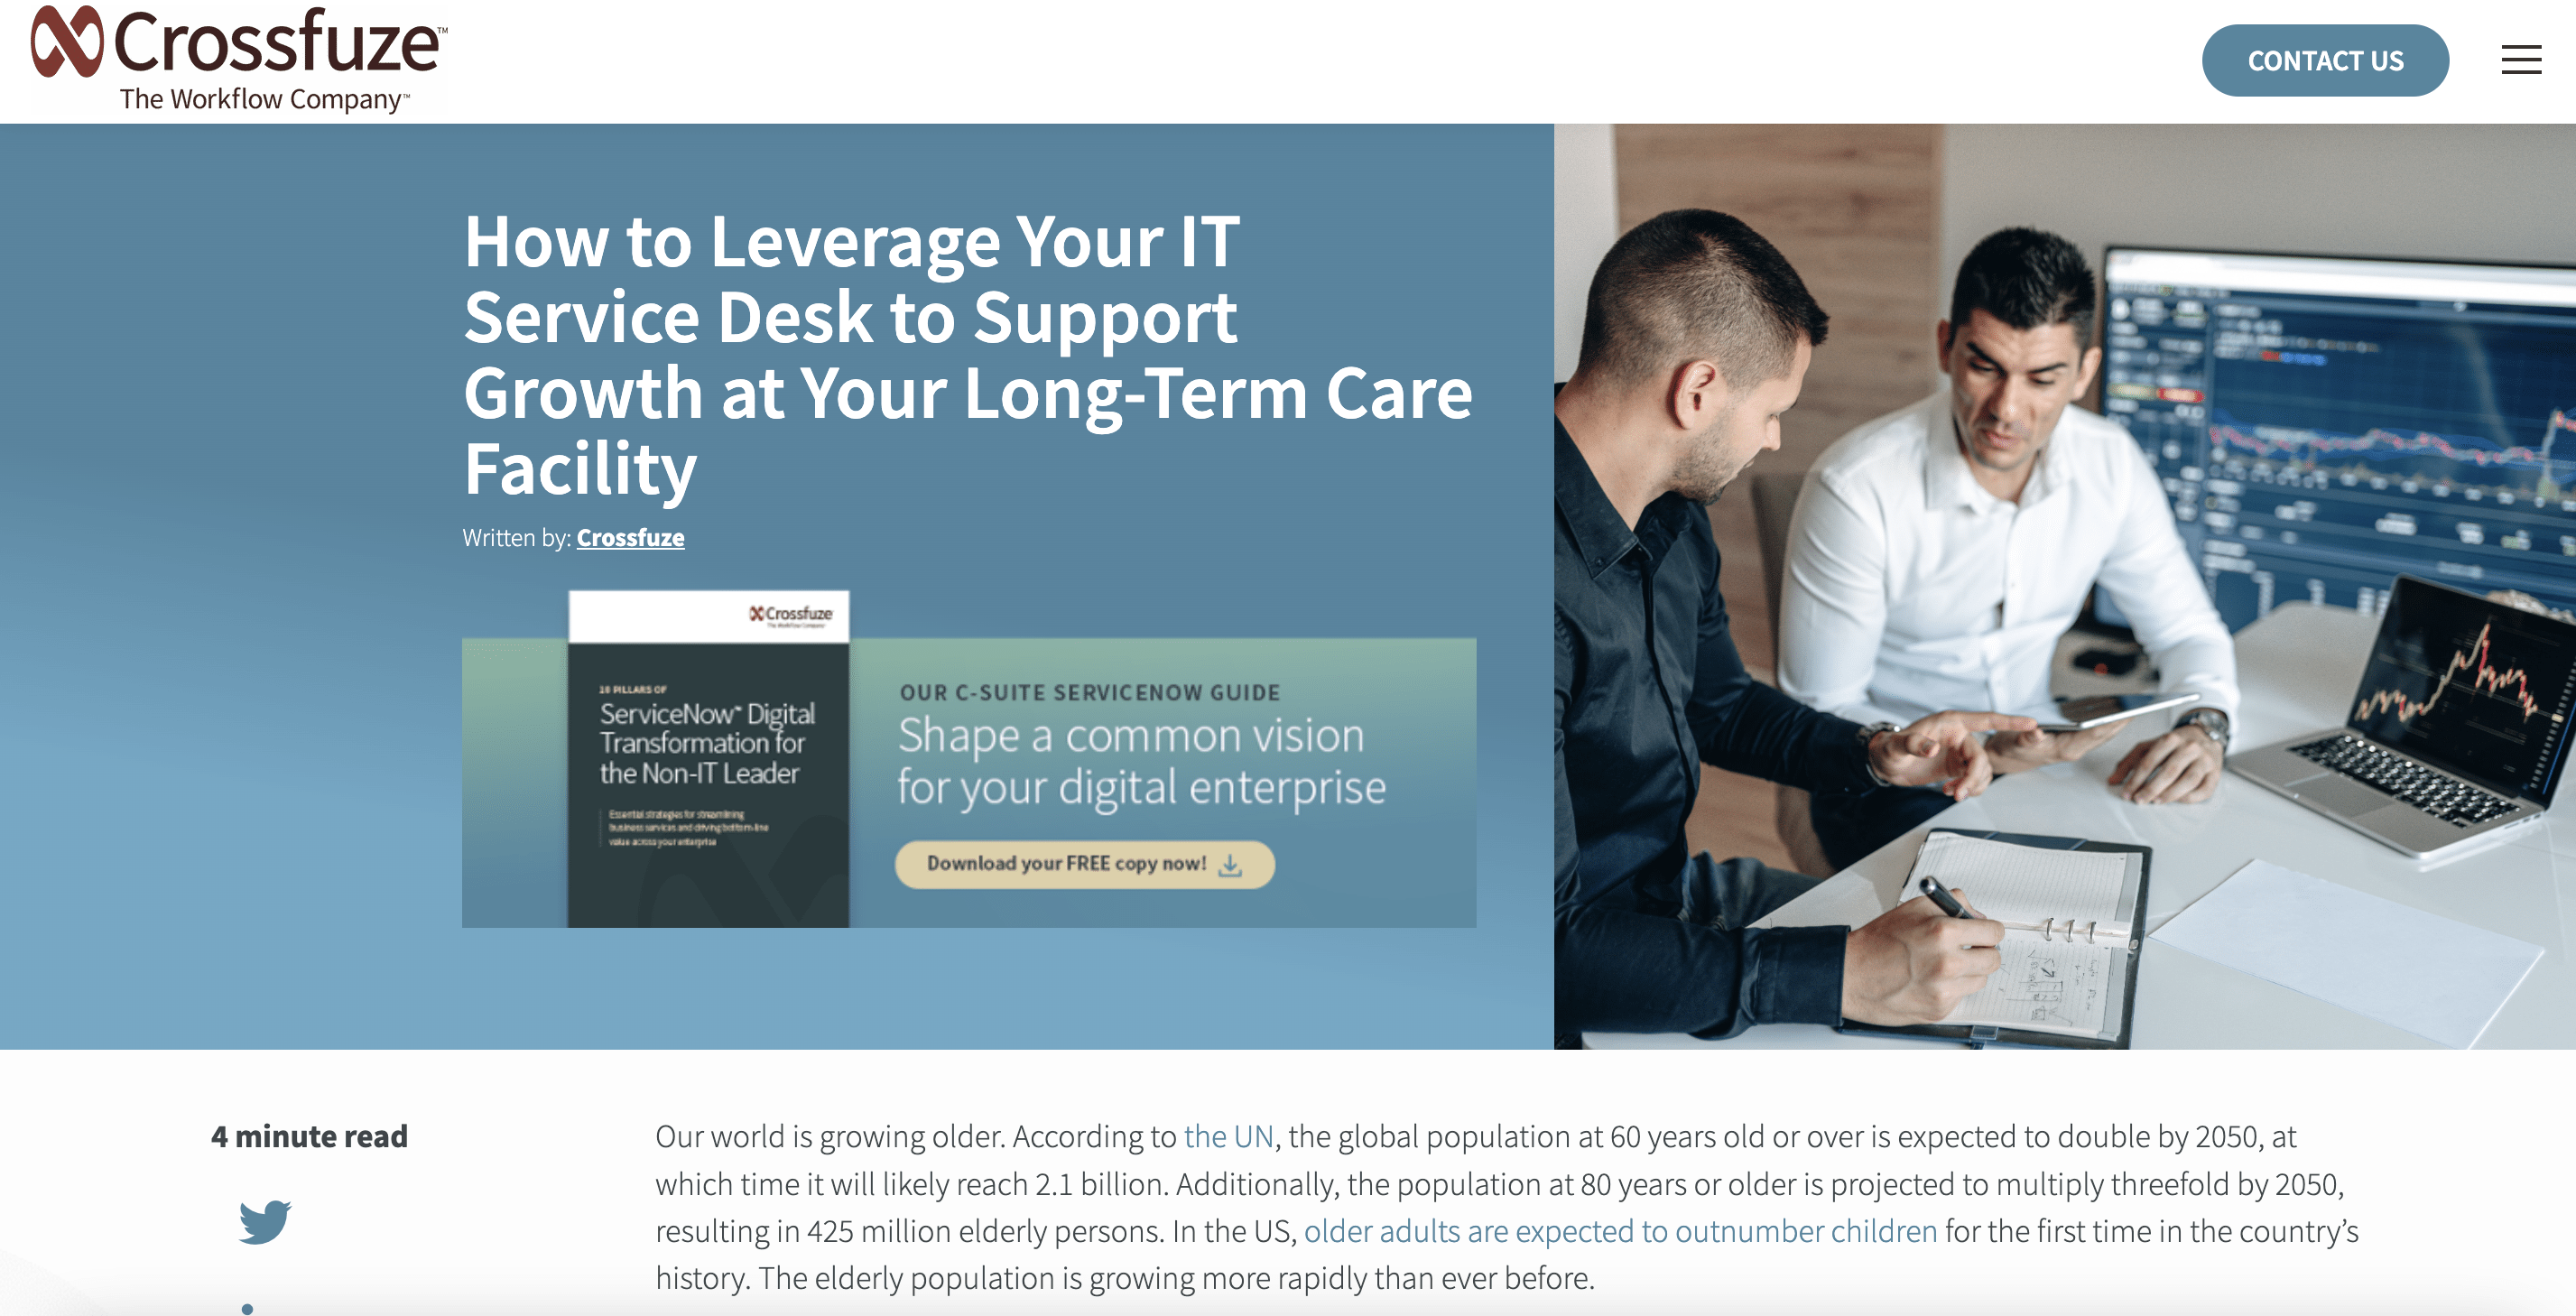 How to Leverage Your IT Service Desk to Support Growth at Your Long-Term Care Facility